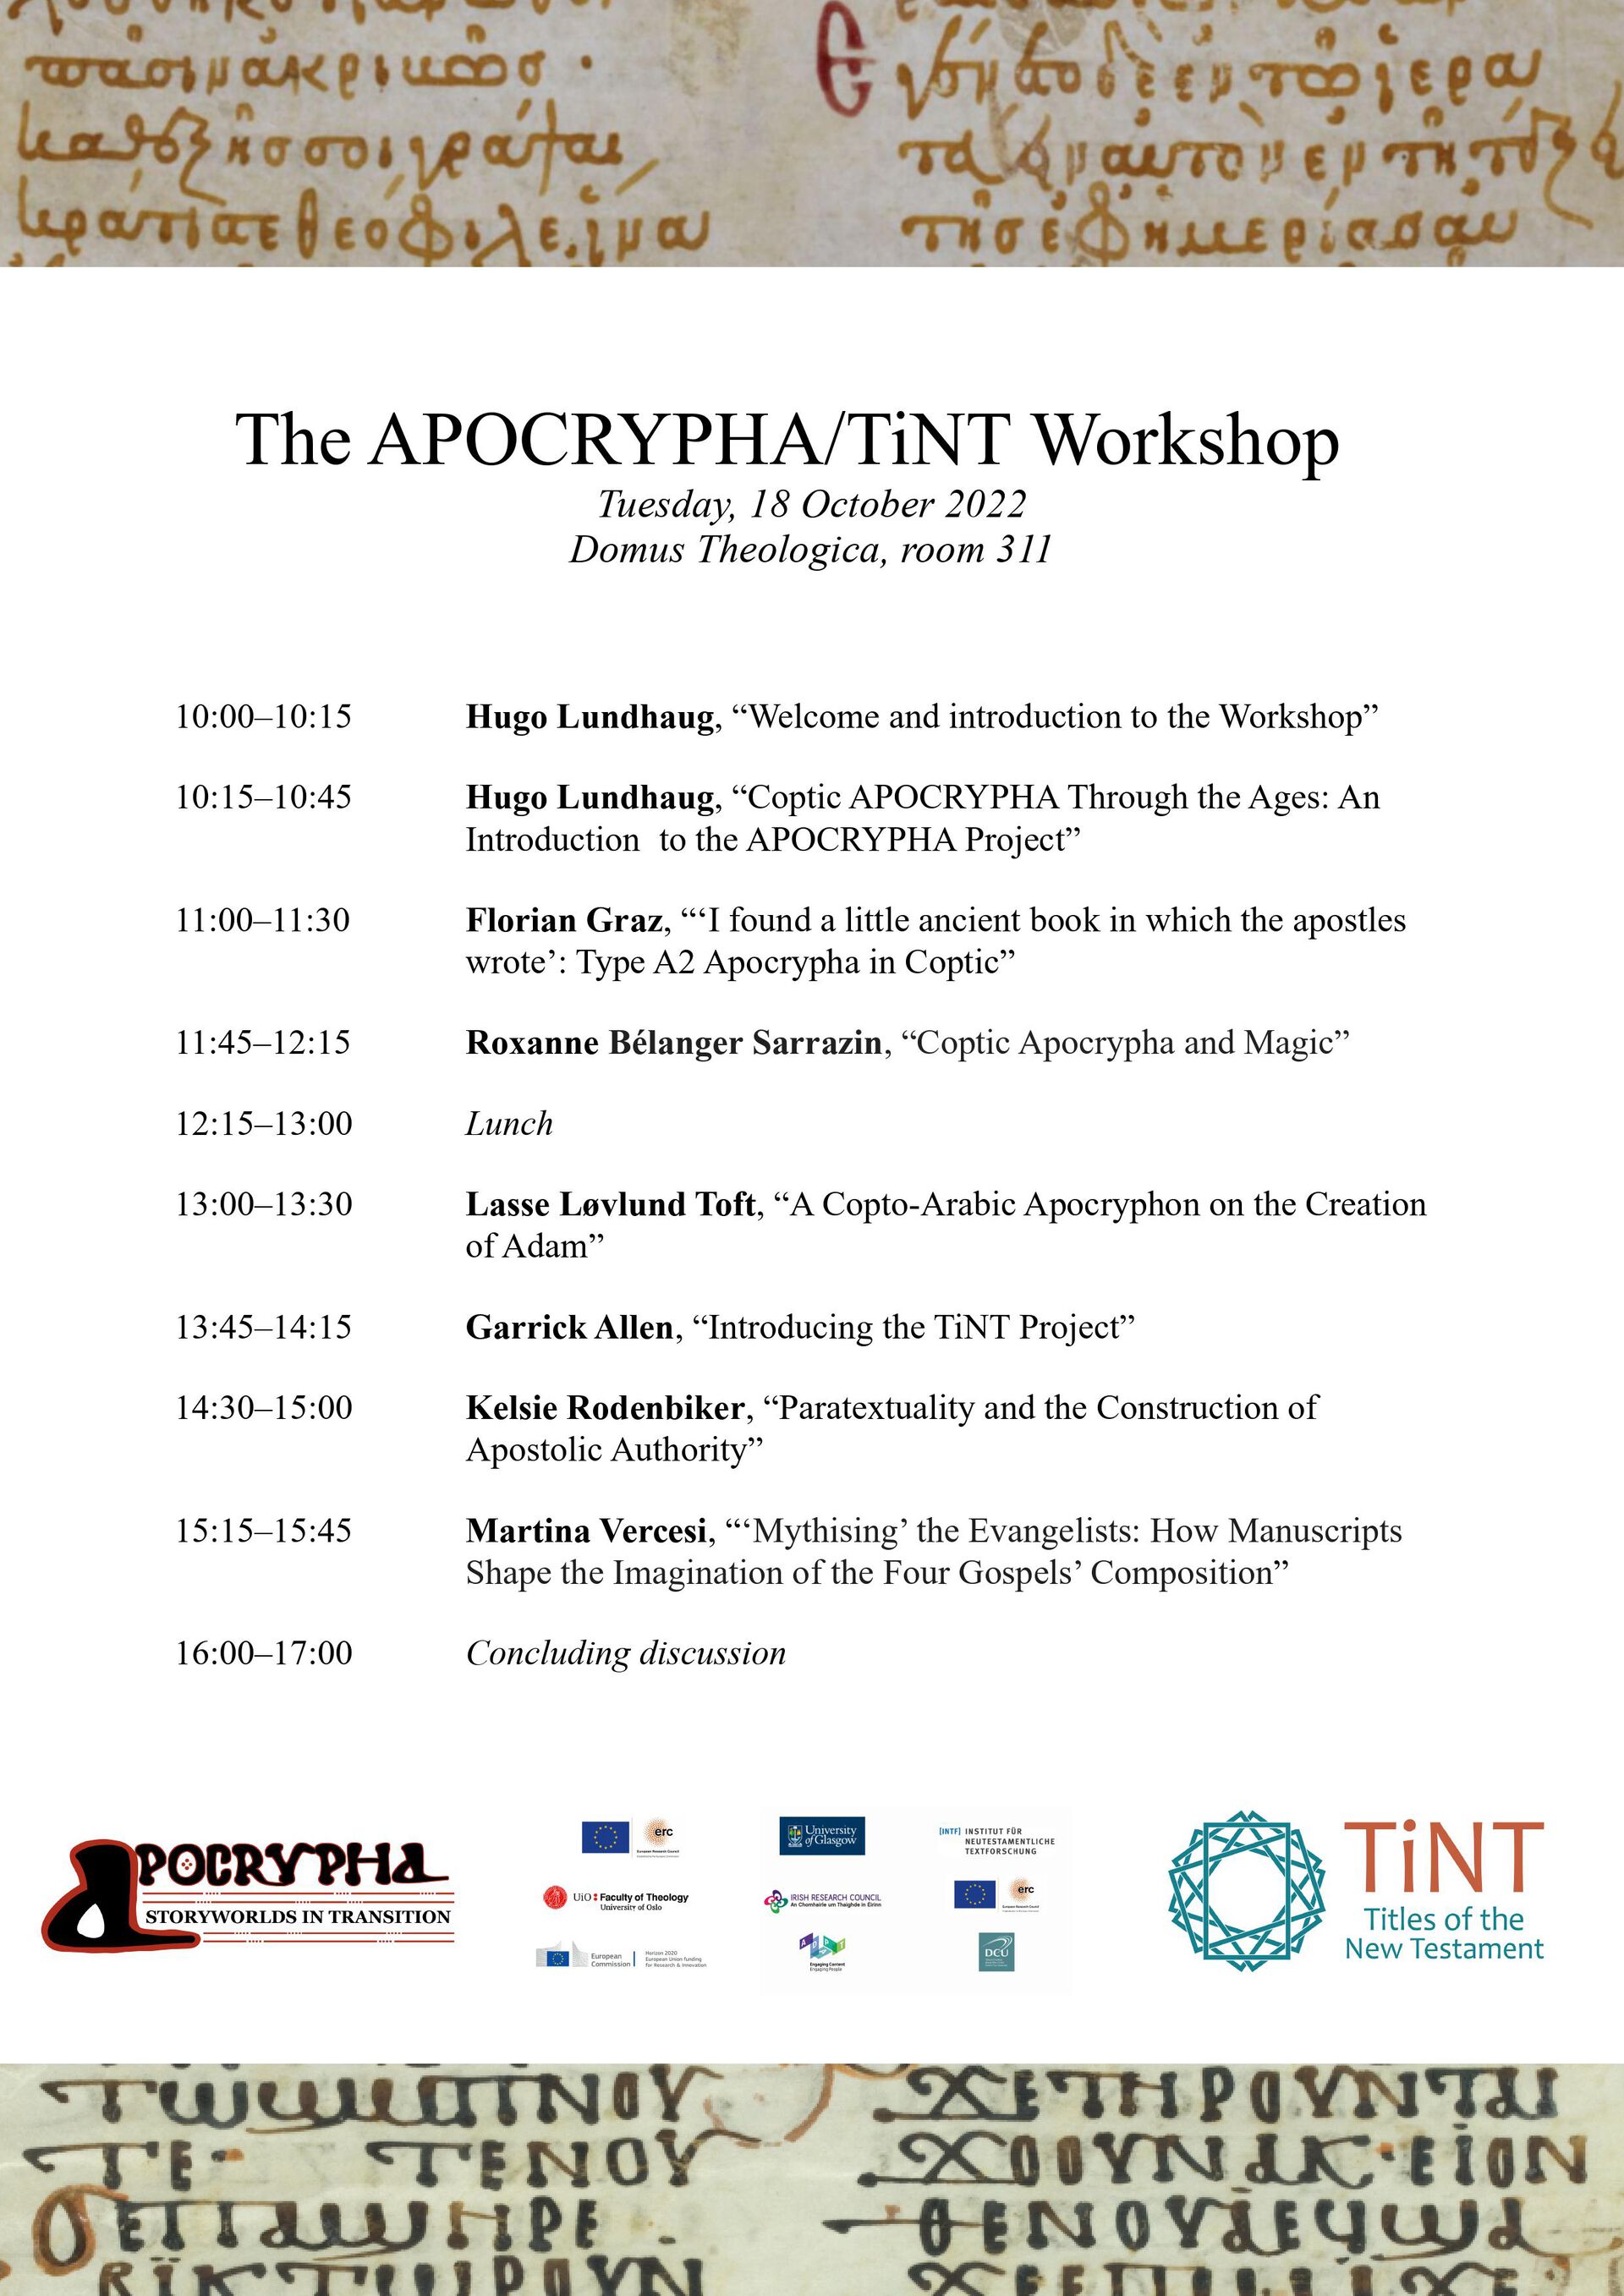 Program for Apocrypha and TiNT workshop. Begins at 10 AM on October 18th, 2022 and ends the same day at 5 PM.